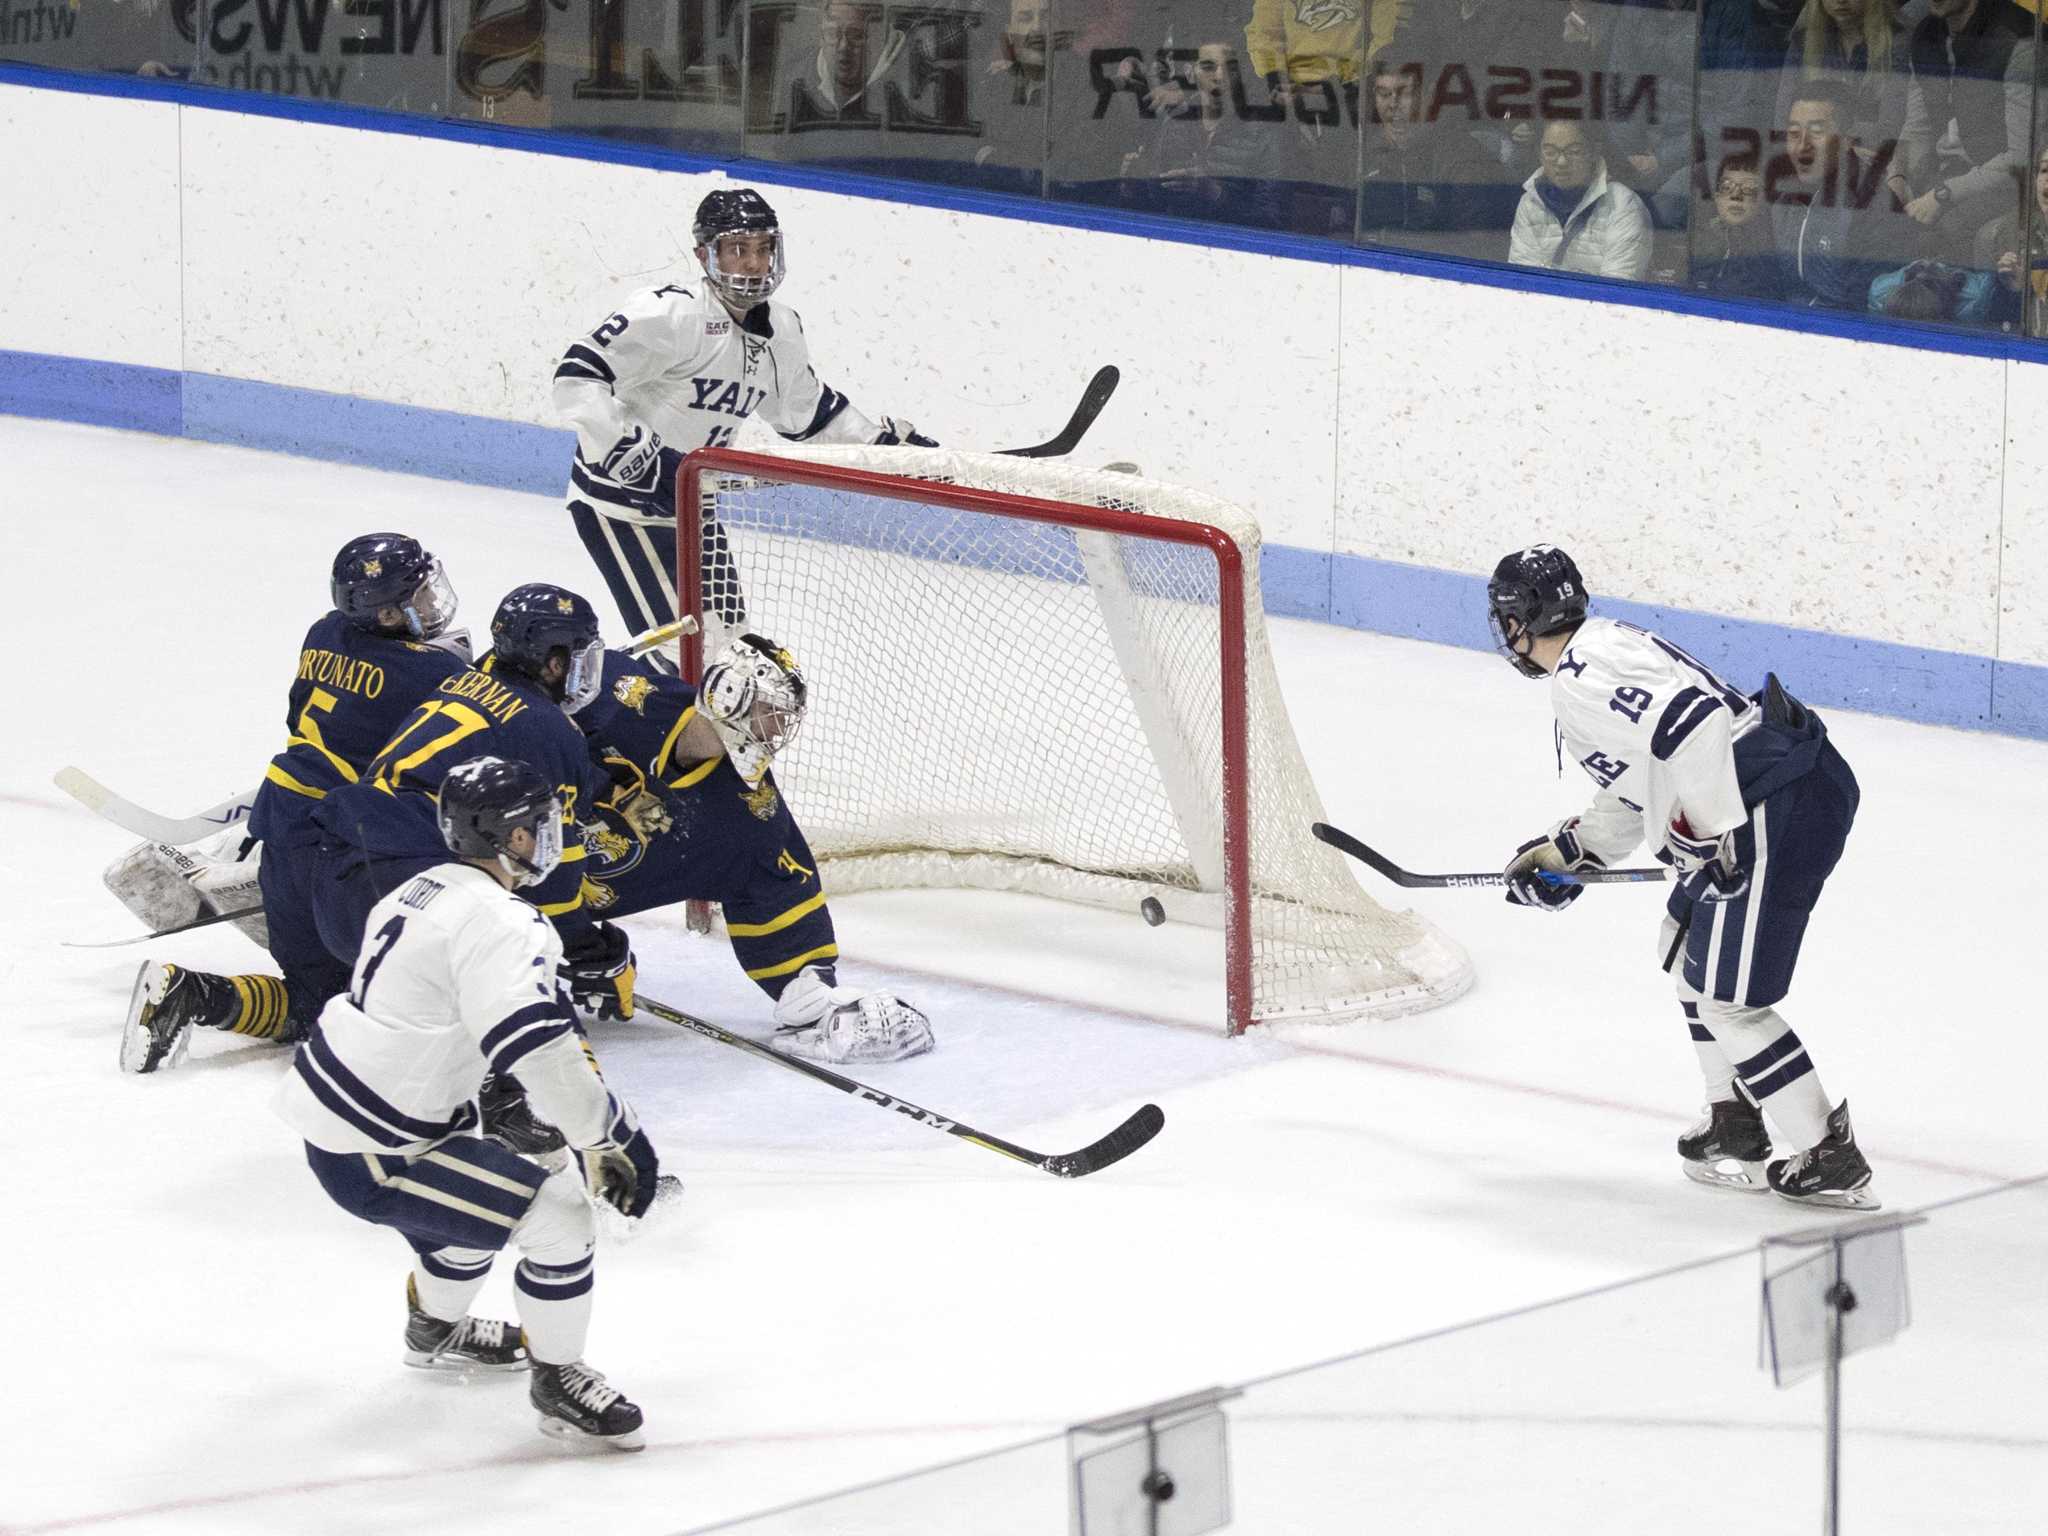 Yale hockey schedule includes trip to Northern Ireland